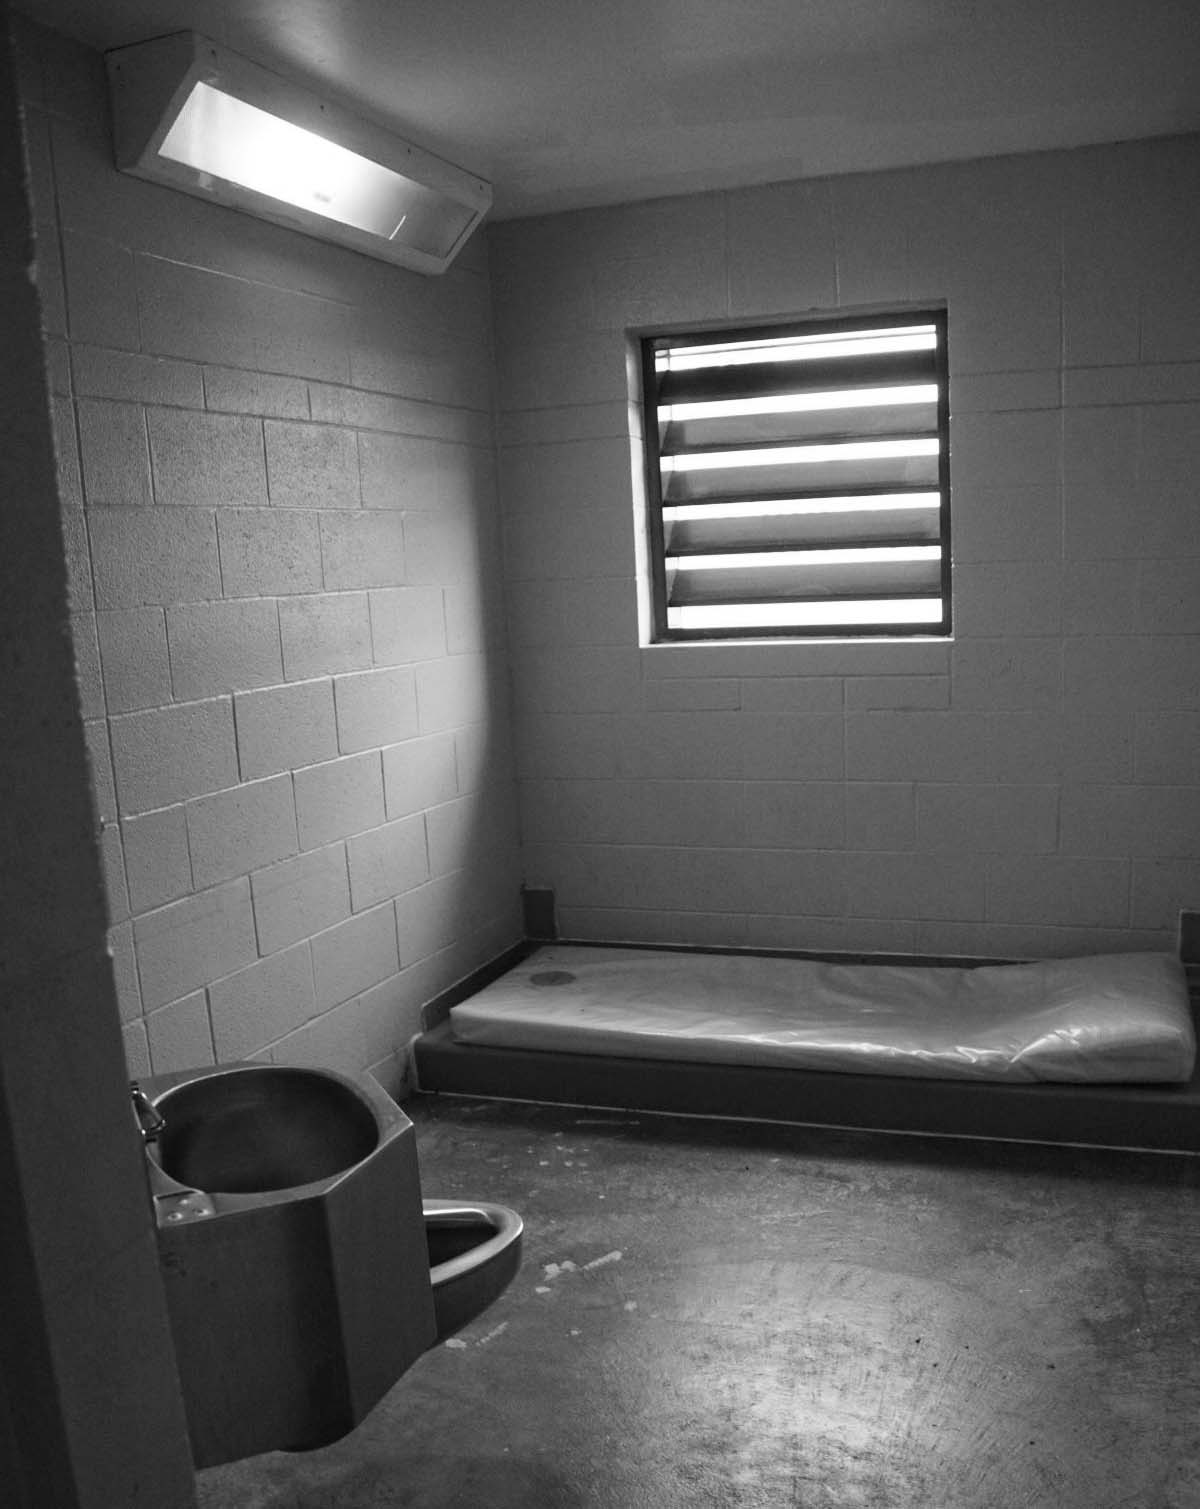 Photo of the interior of a small solitary confinement cell containing a toilet, sink and small bed on the floor.